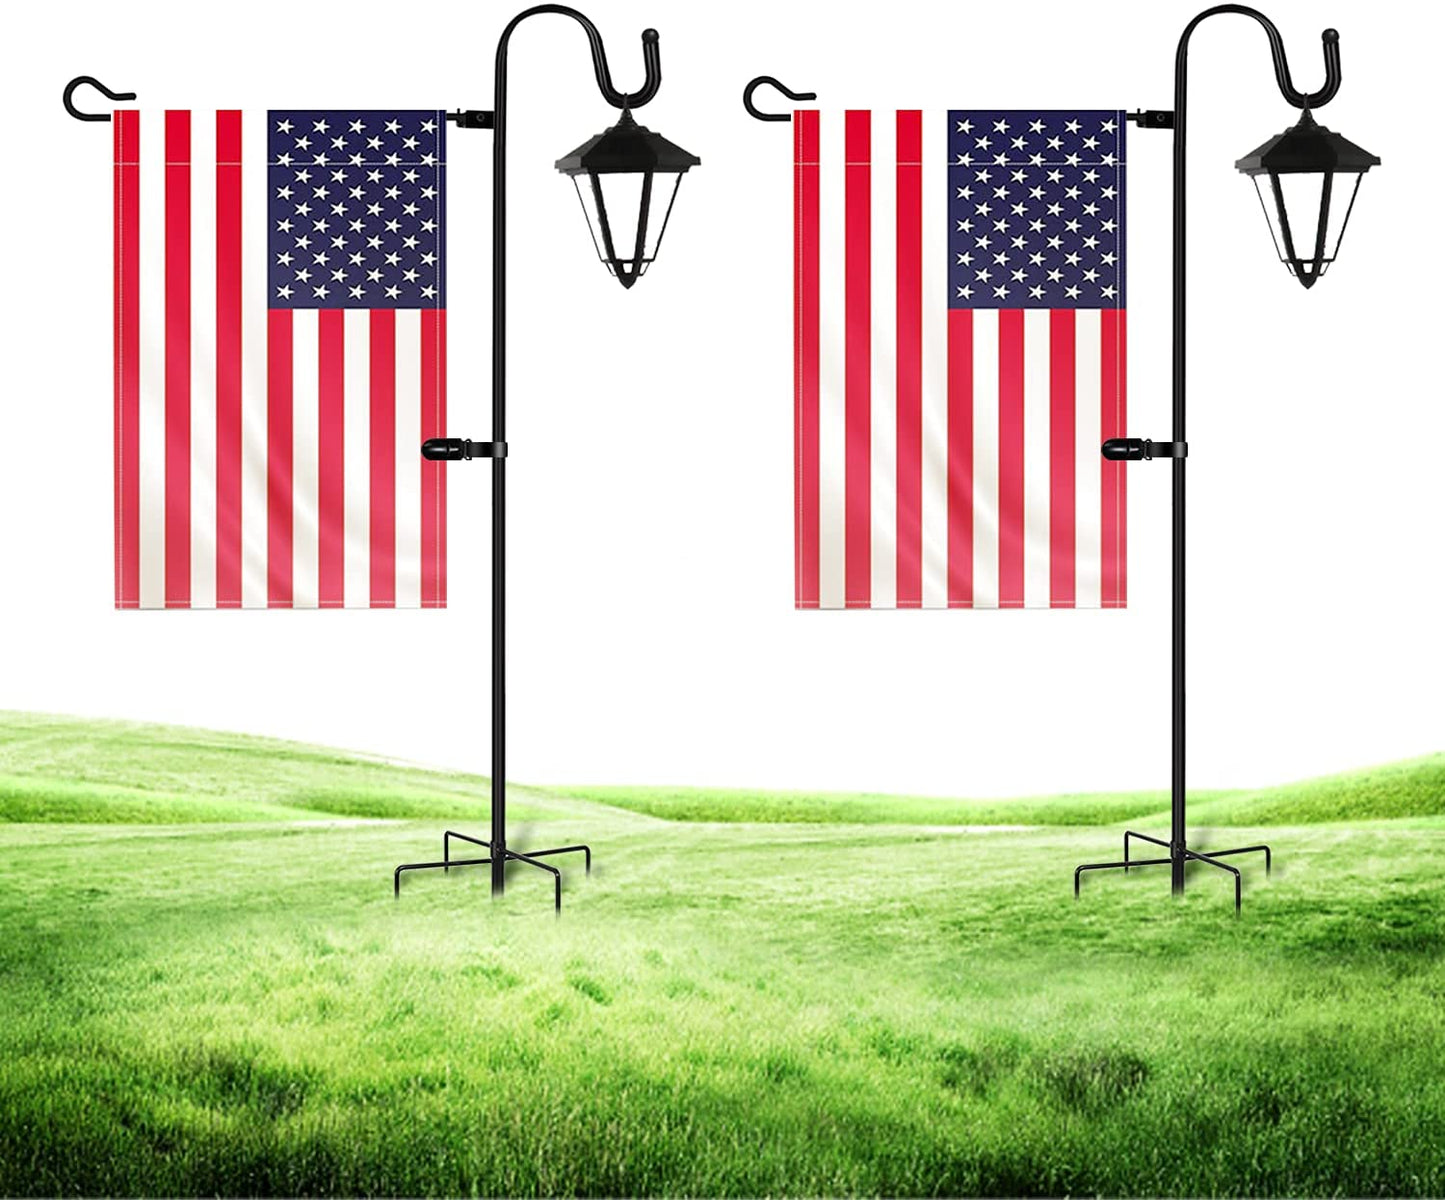 JOYSEUS Garden Flag Holder Stand and Shepherd Hook - 2 Pack - 36 Inch with 1/2 Inch Thick Heavy Duty Rust Resistant Flag Holder Stand for Flag, Solar Lights, and Wreath (Not Including Solar Lights)